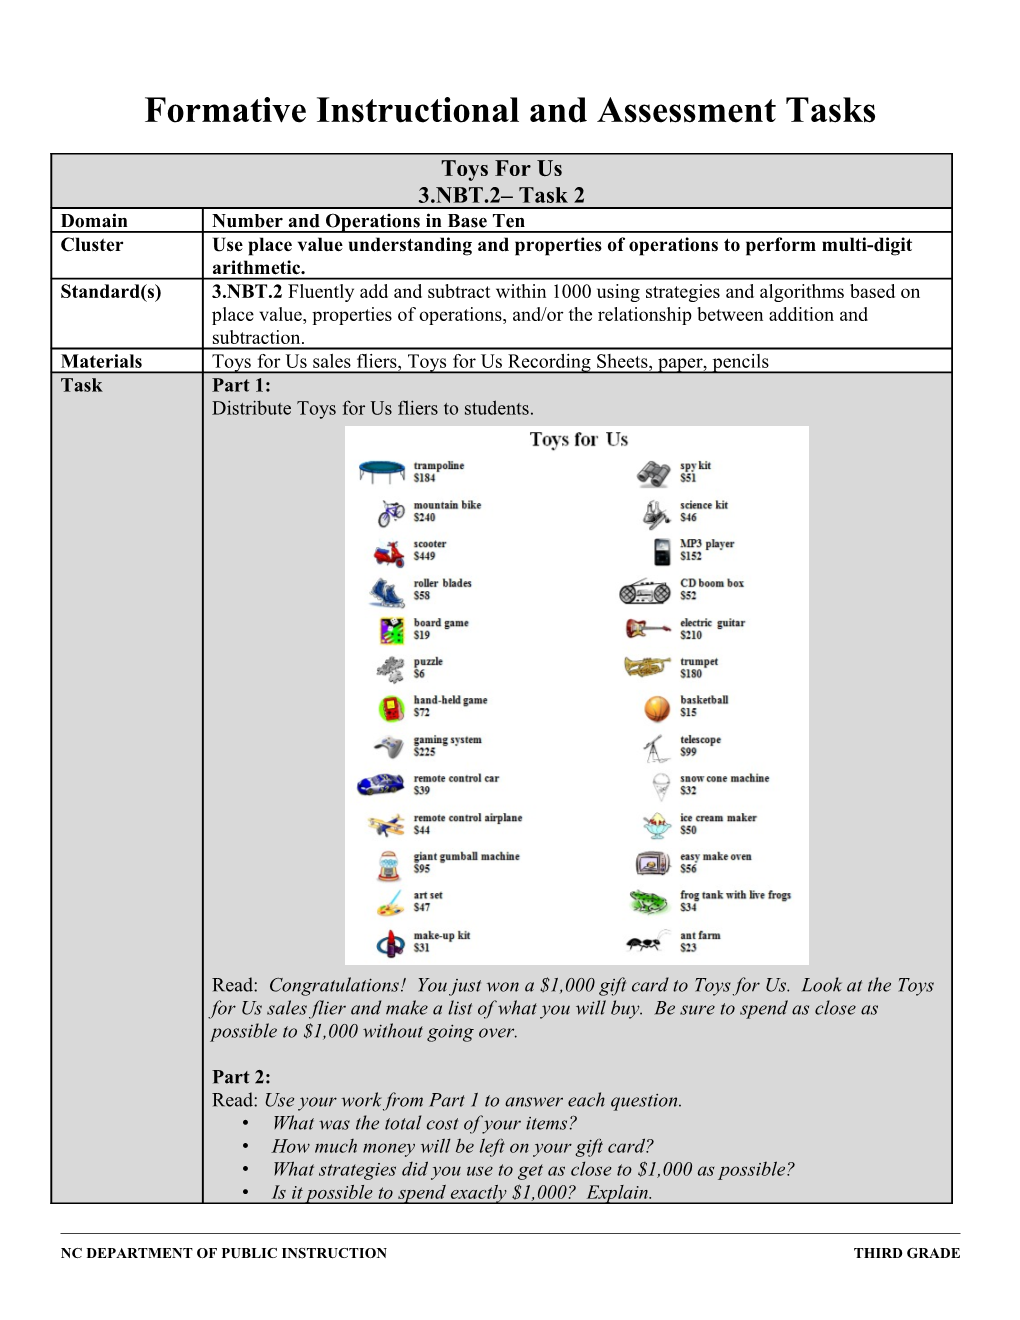 Formative Instructional and Assessment Tasks s16